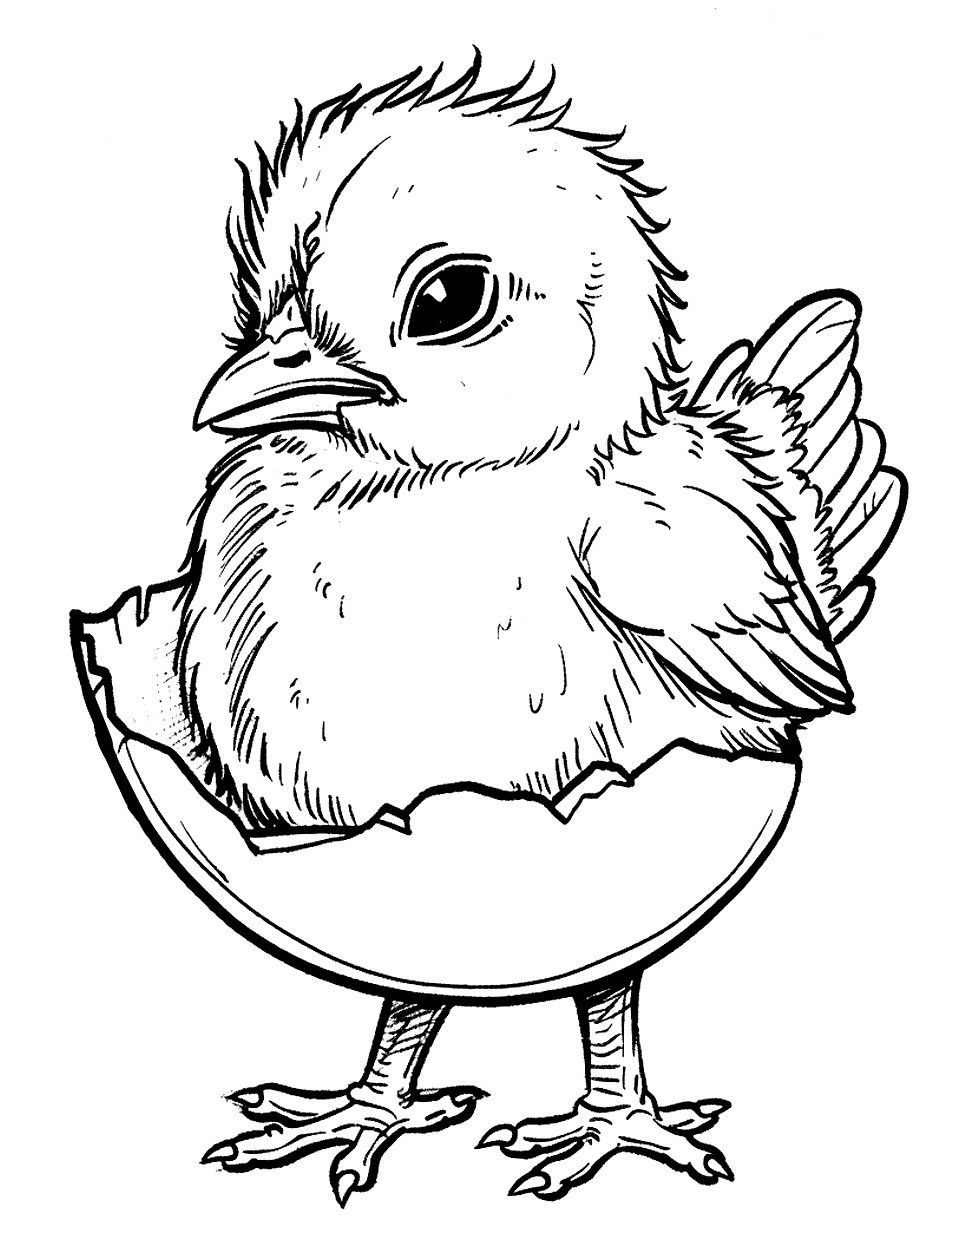 Baby Chick Just Hatched Chicken Coloring Page - A cute, baby chick emerging from an eggshell, looking curious.